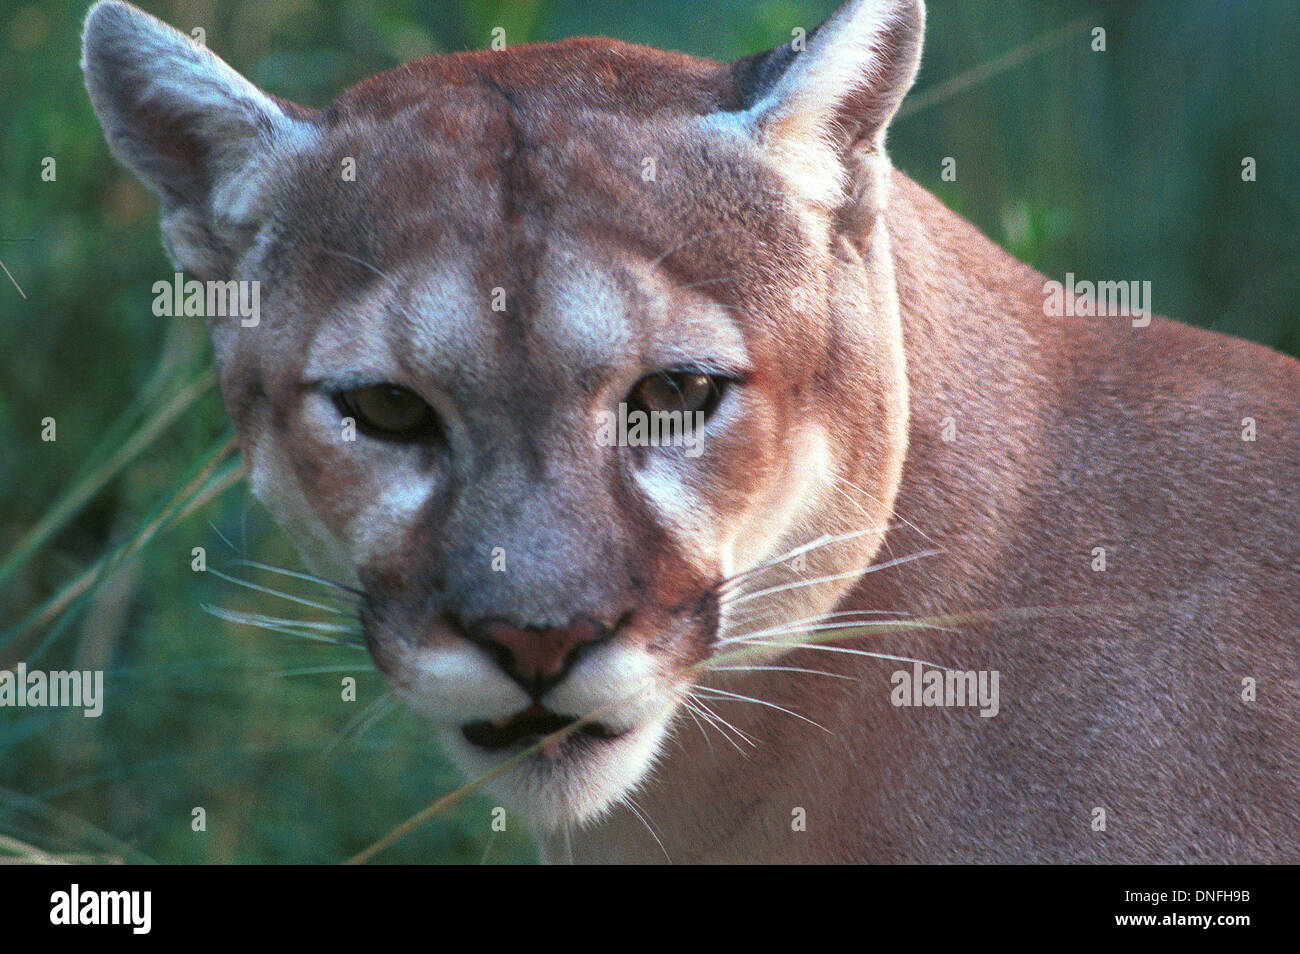 Cougar, Puma, mountain lion large cat in family of Felidae native to America, stalk and ambush their prey, Stock Photo